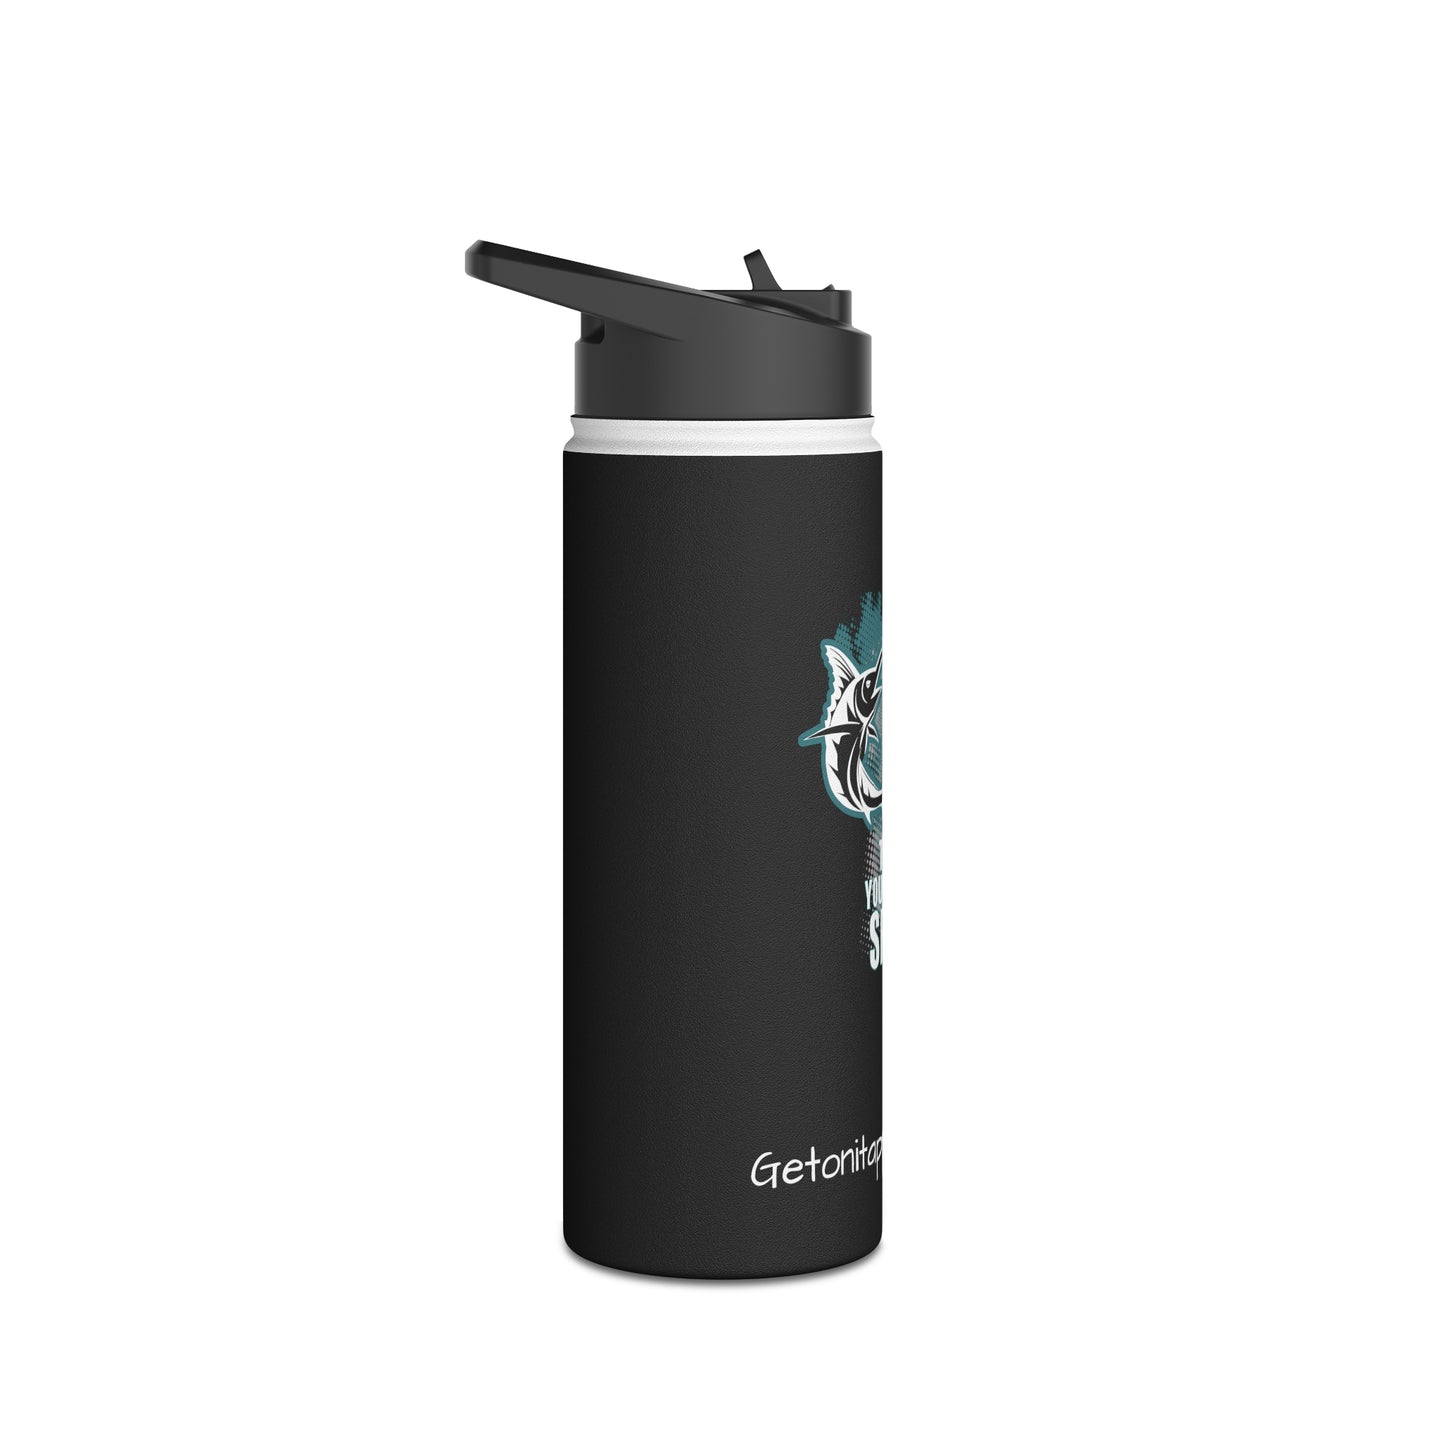 Stainless Steel Water Bottle - If You Can Read This You Need To Find Your Own Spot